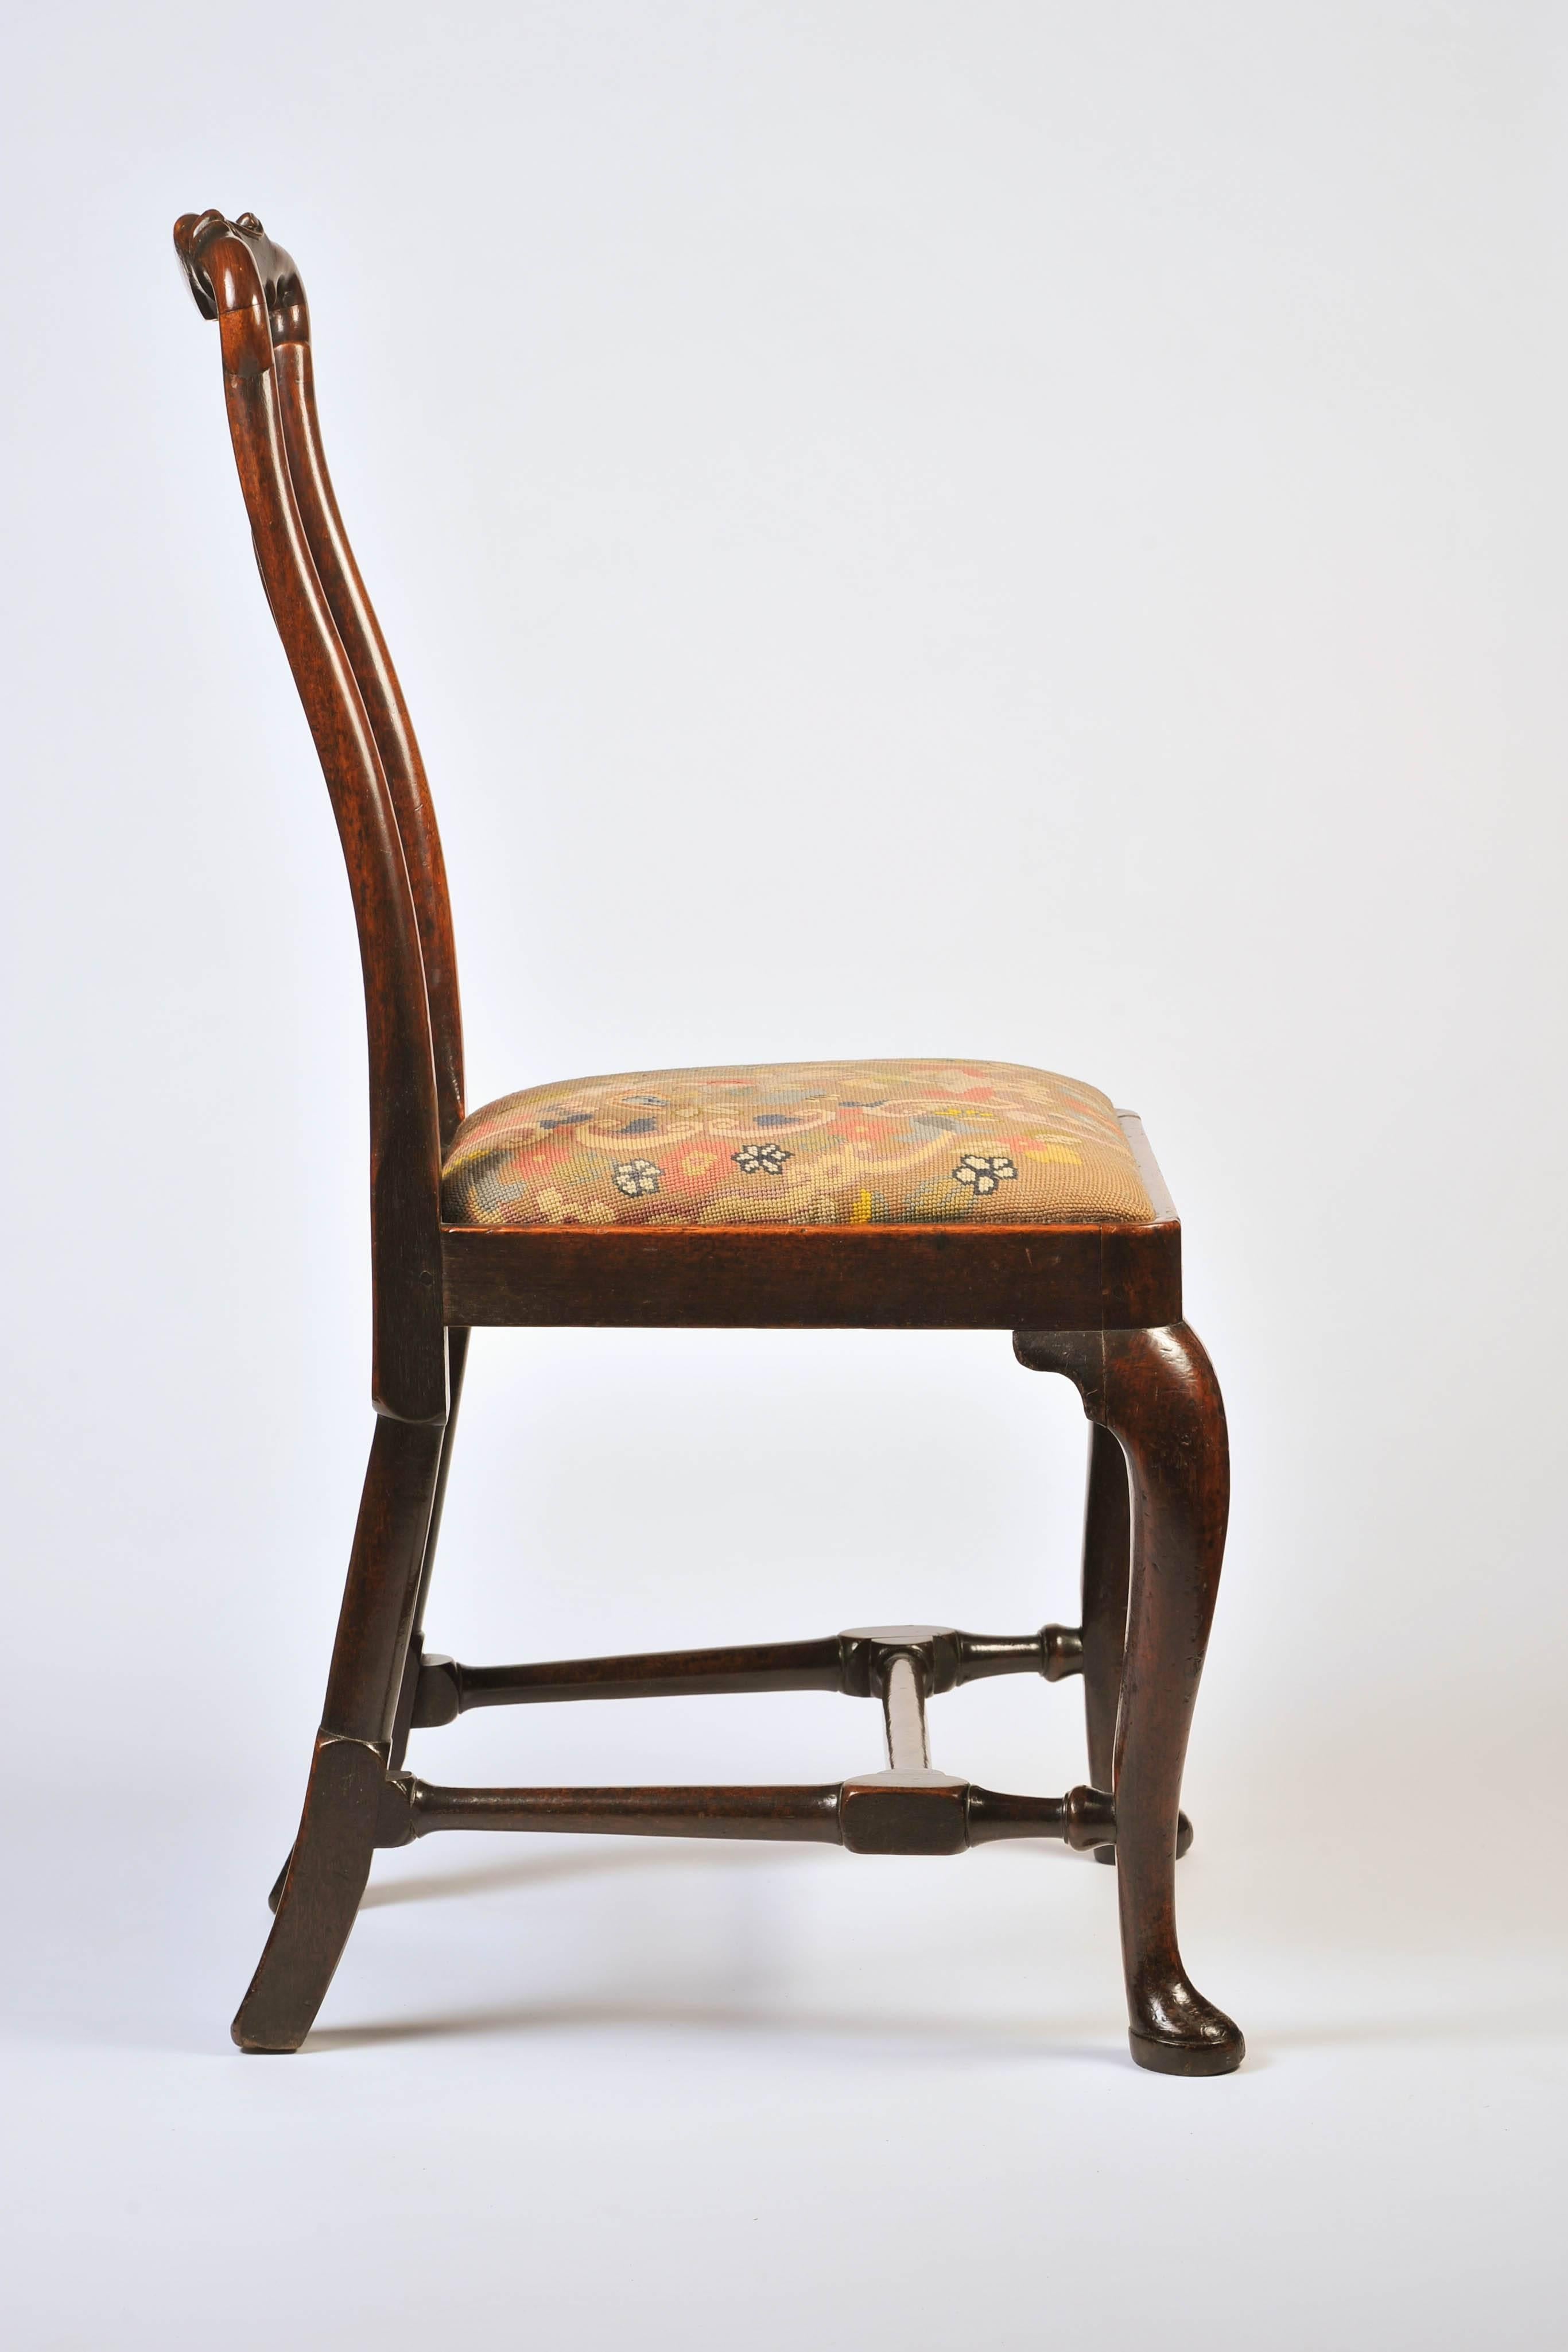 Great Britain (UK) Pair of Early 18th Century Walnut Chairs